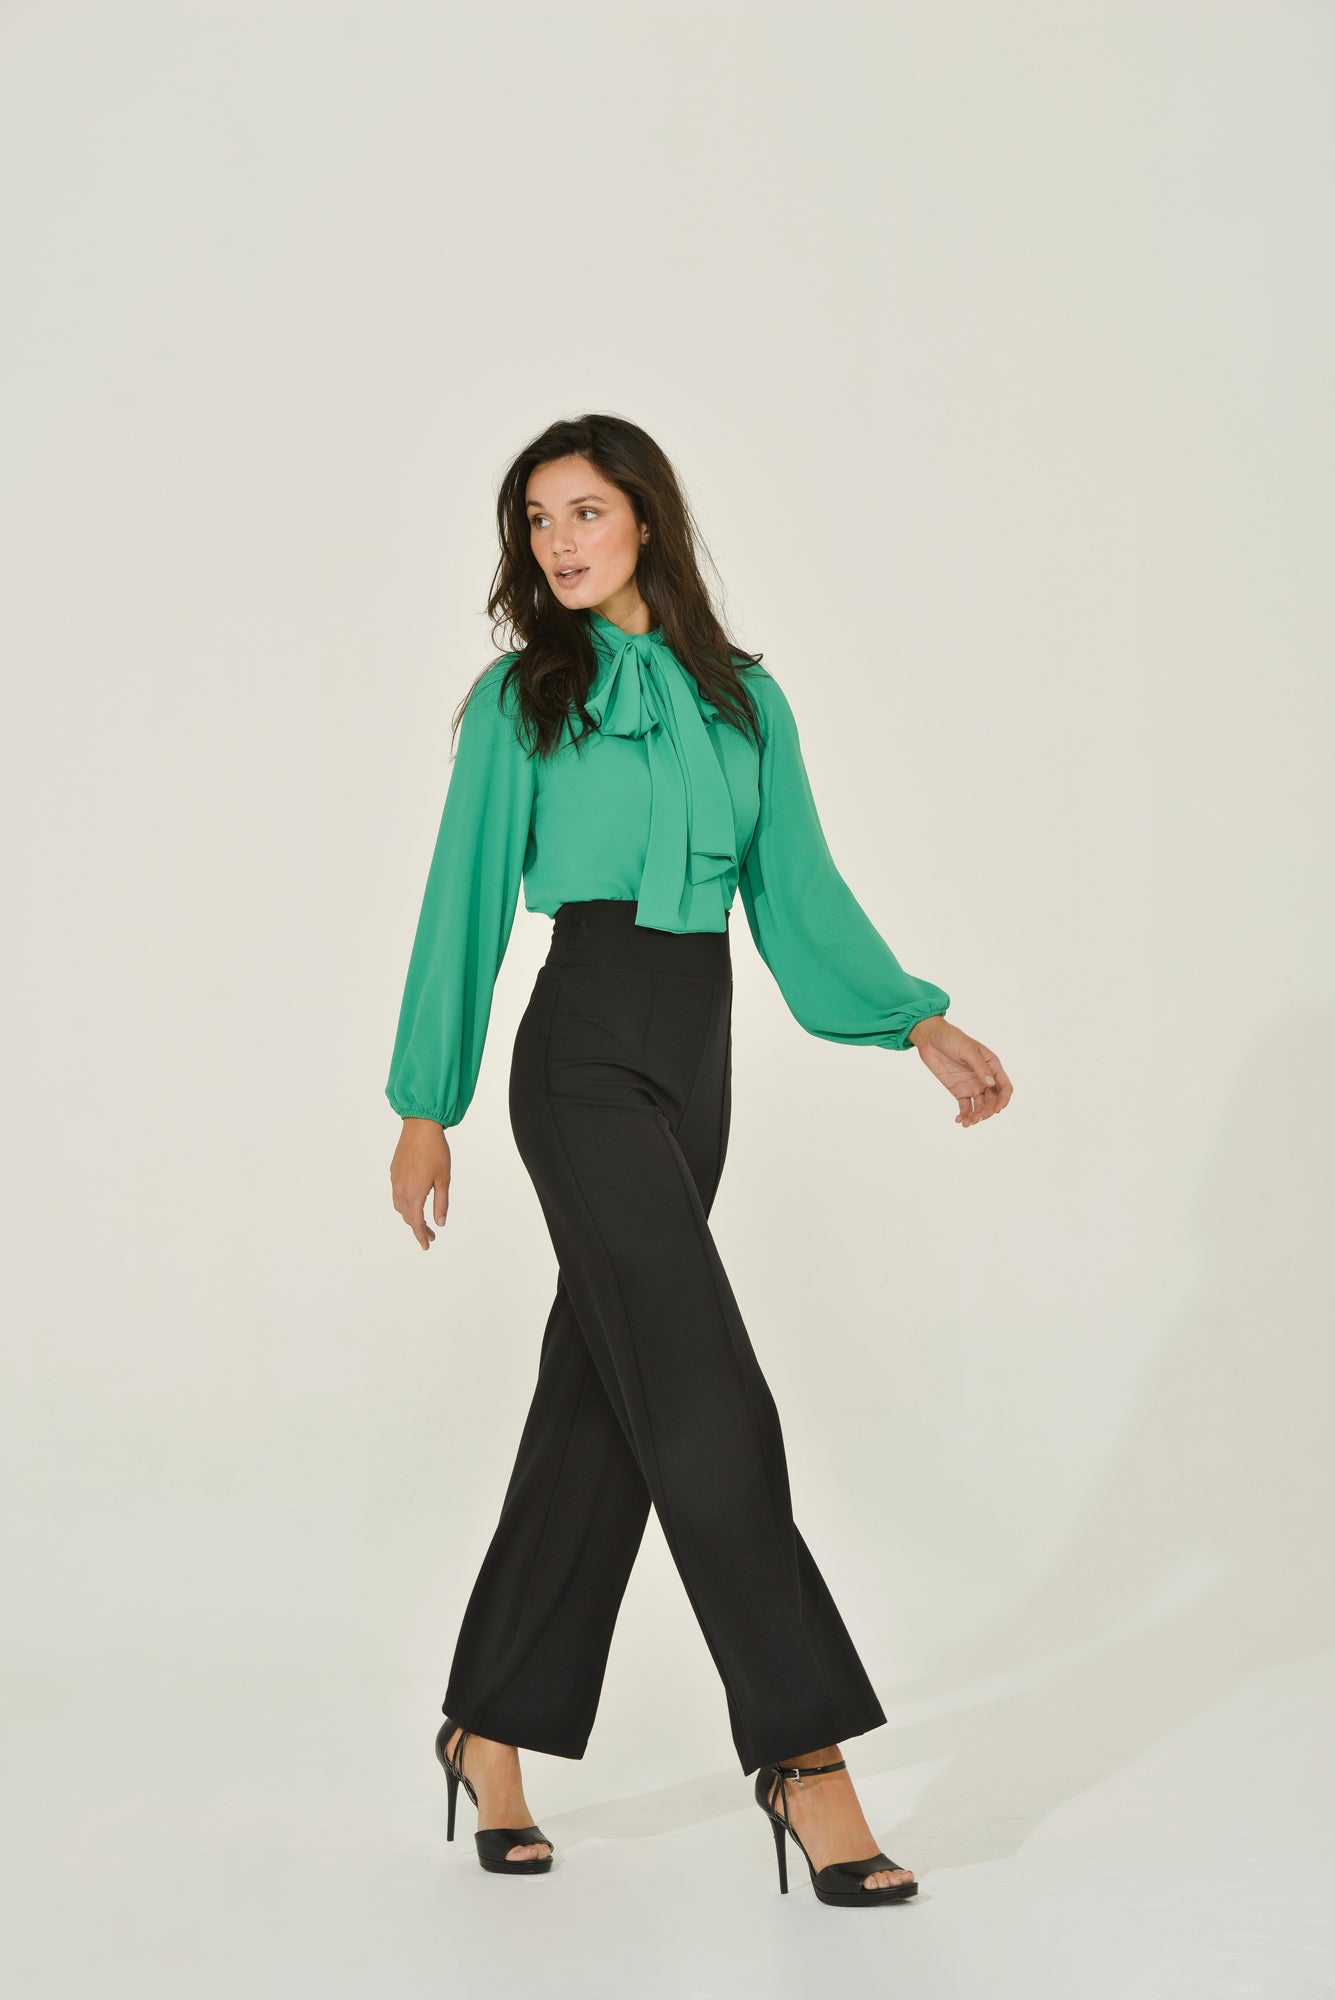 Extra Tall Women's Tiered Palazzo Pants – The Elevated Closet